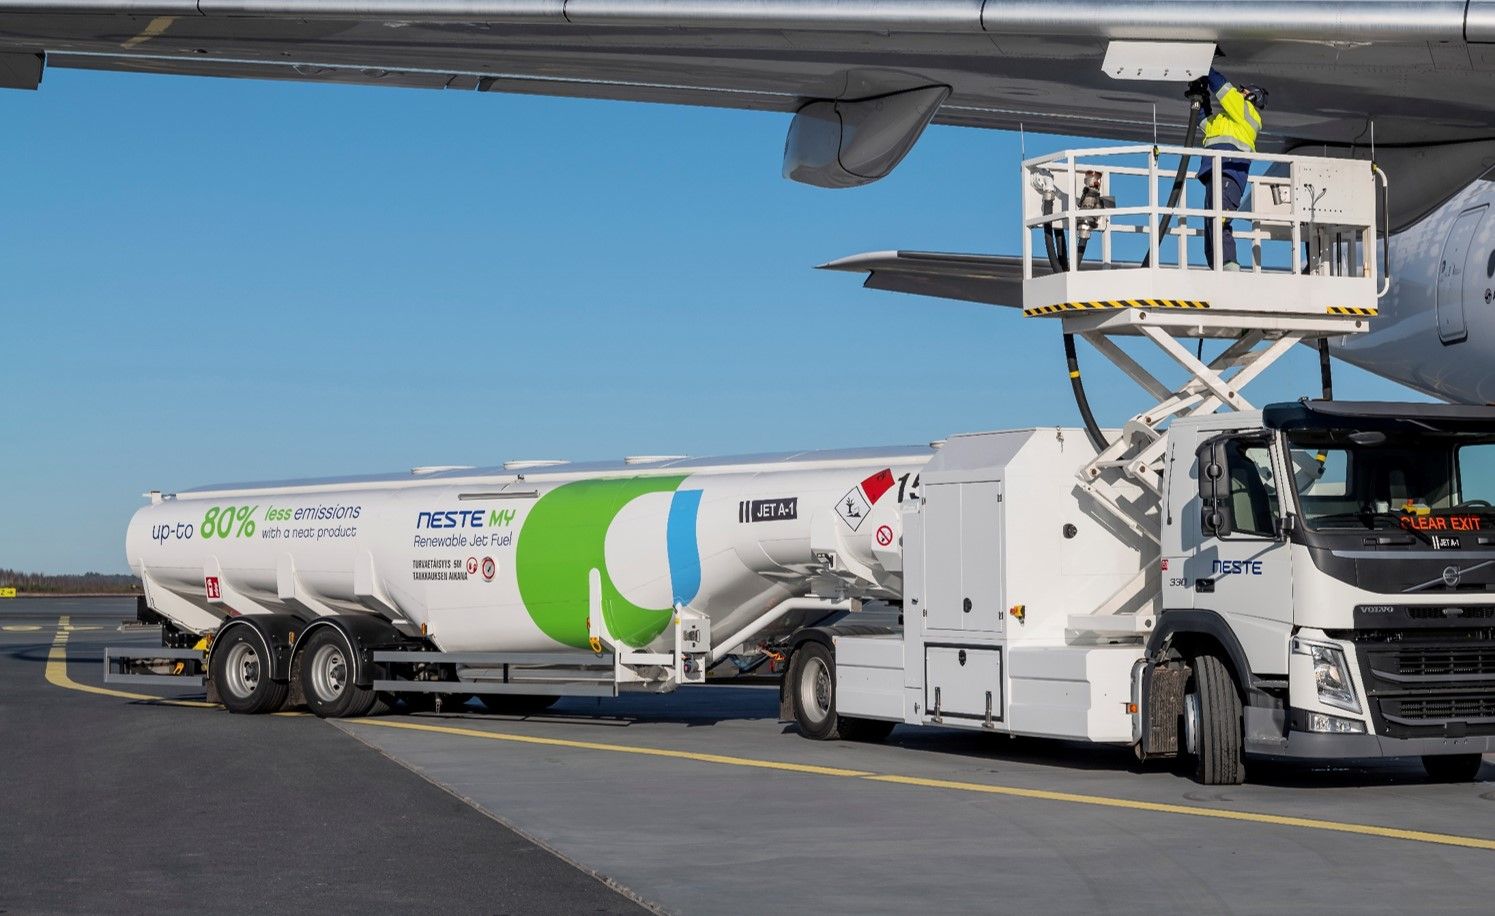 A Neste truck filled with sustainable aviation fuel parked beneath an aircraft wing.